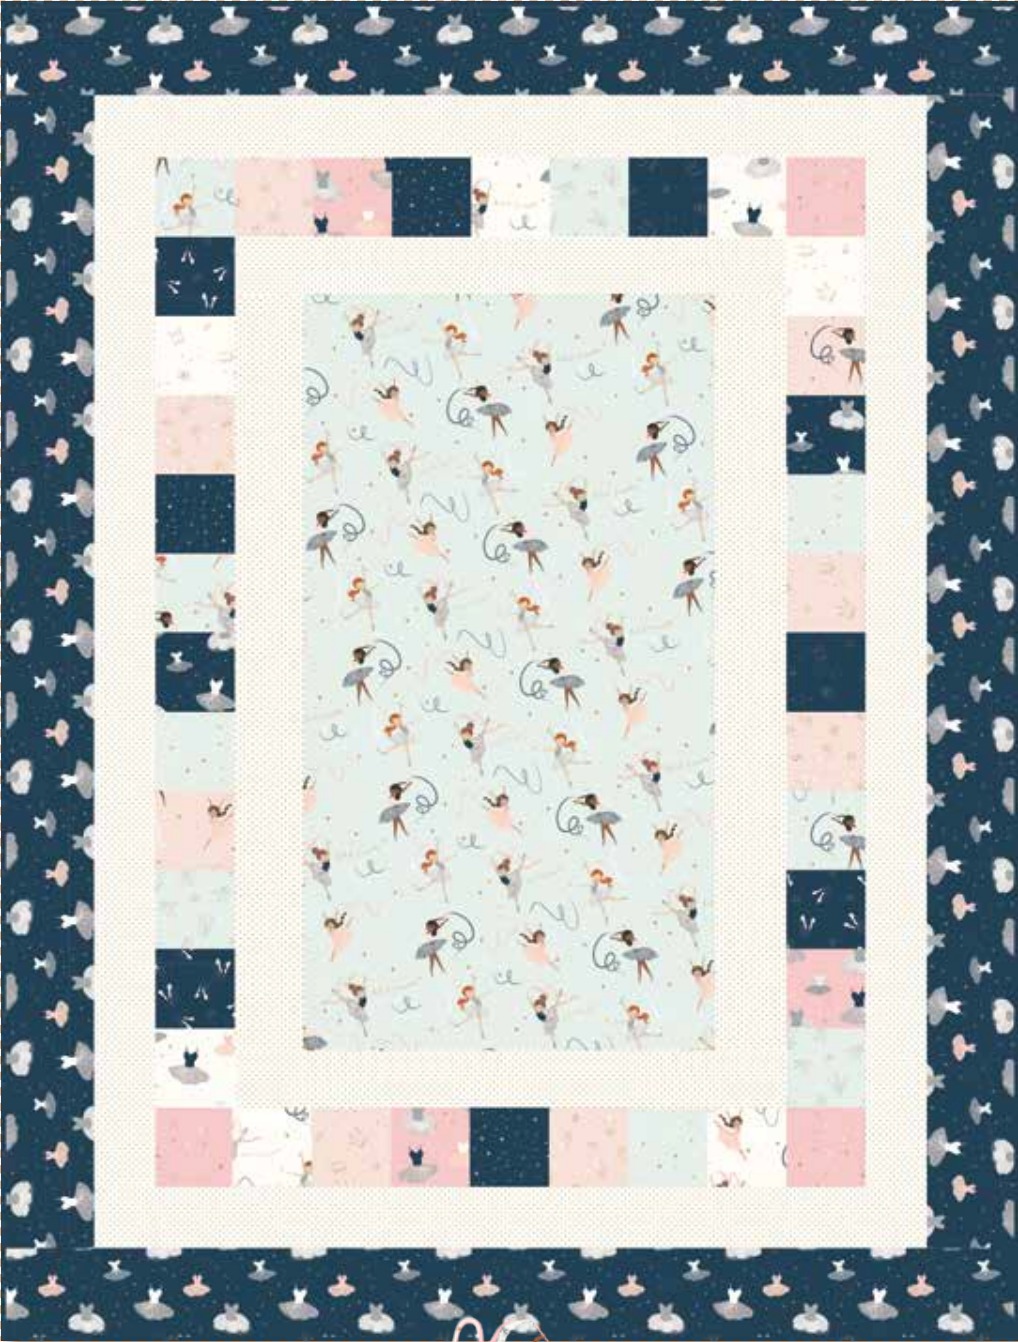 Twinkle Toes Quilt Pattern - Free Digital Download-Riley Blake Fabrics-My Favorite Quilt Store